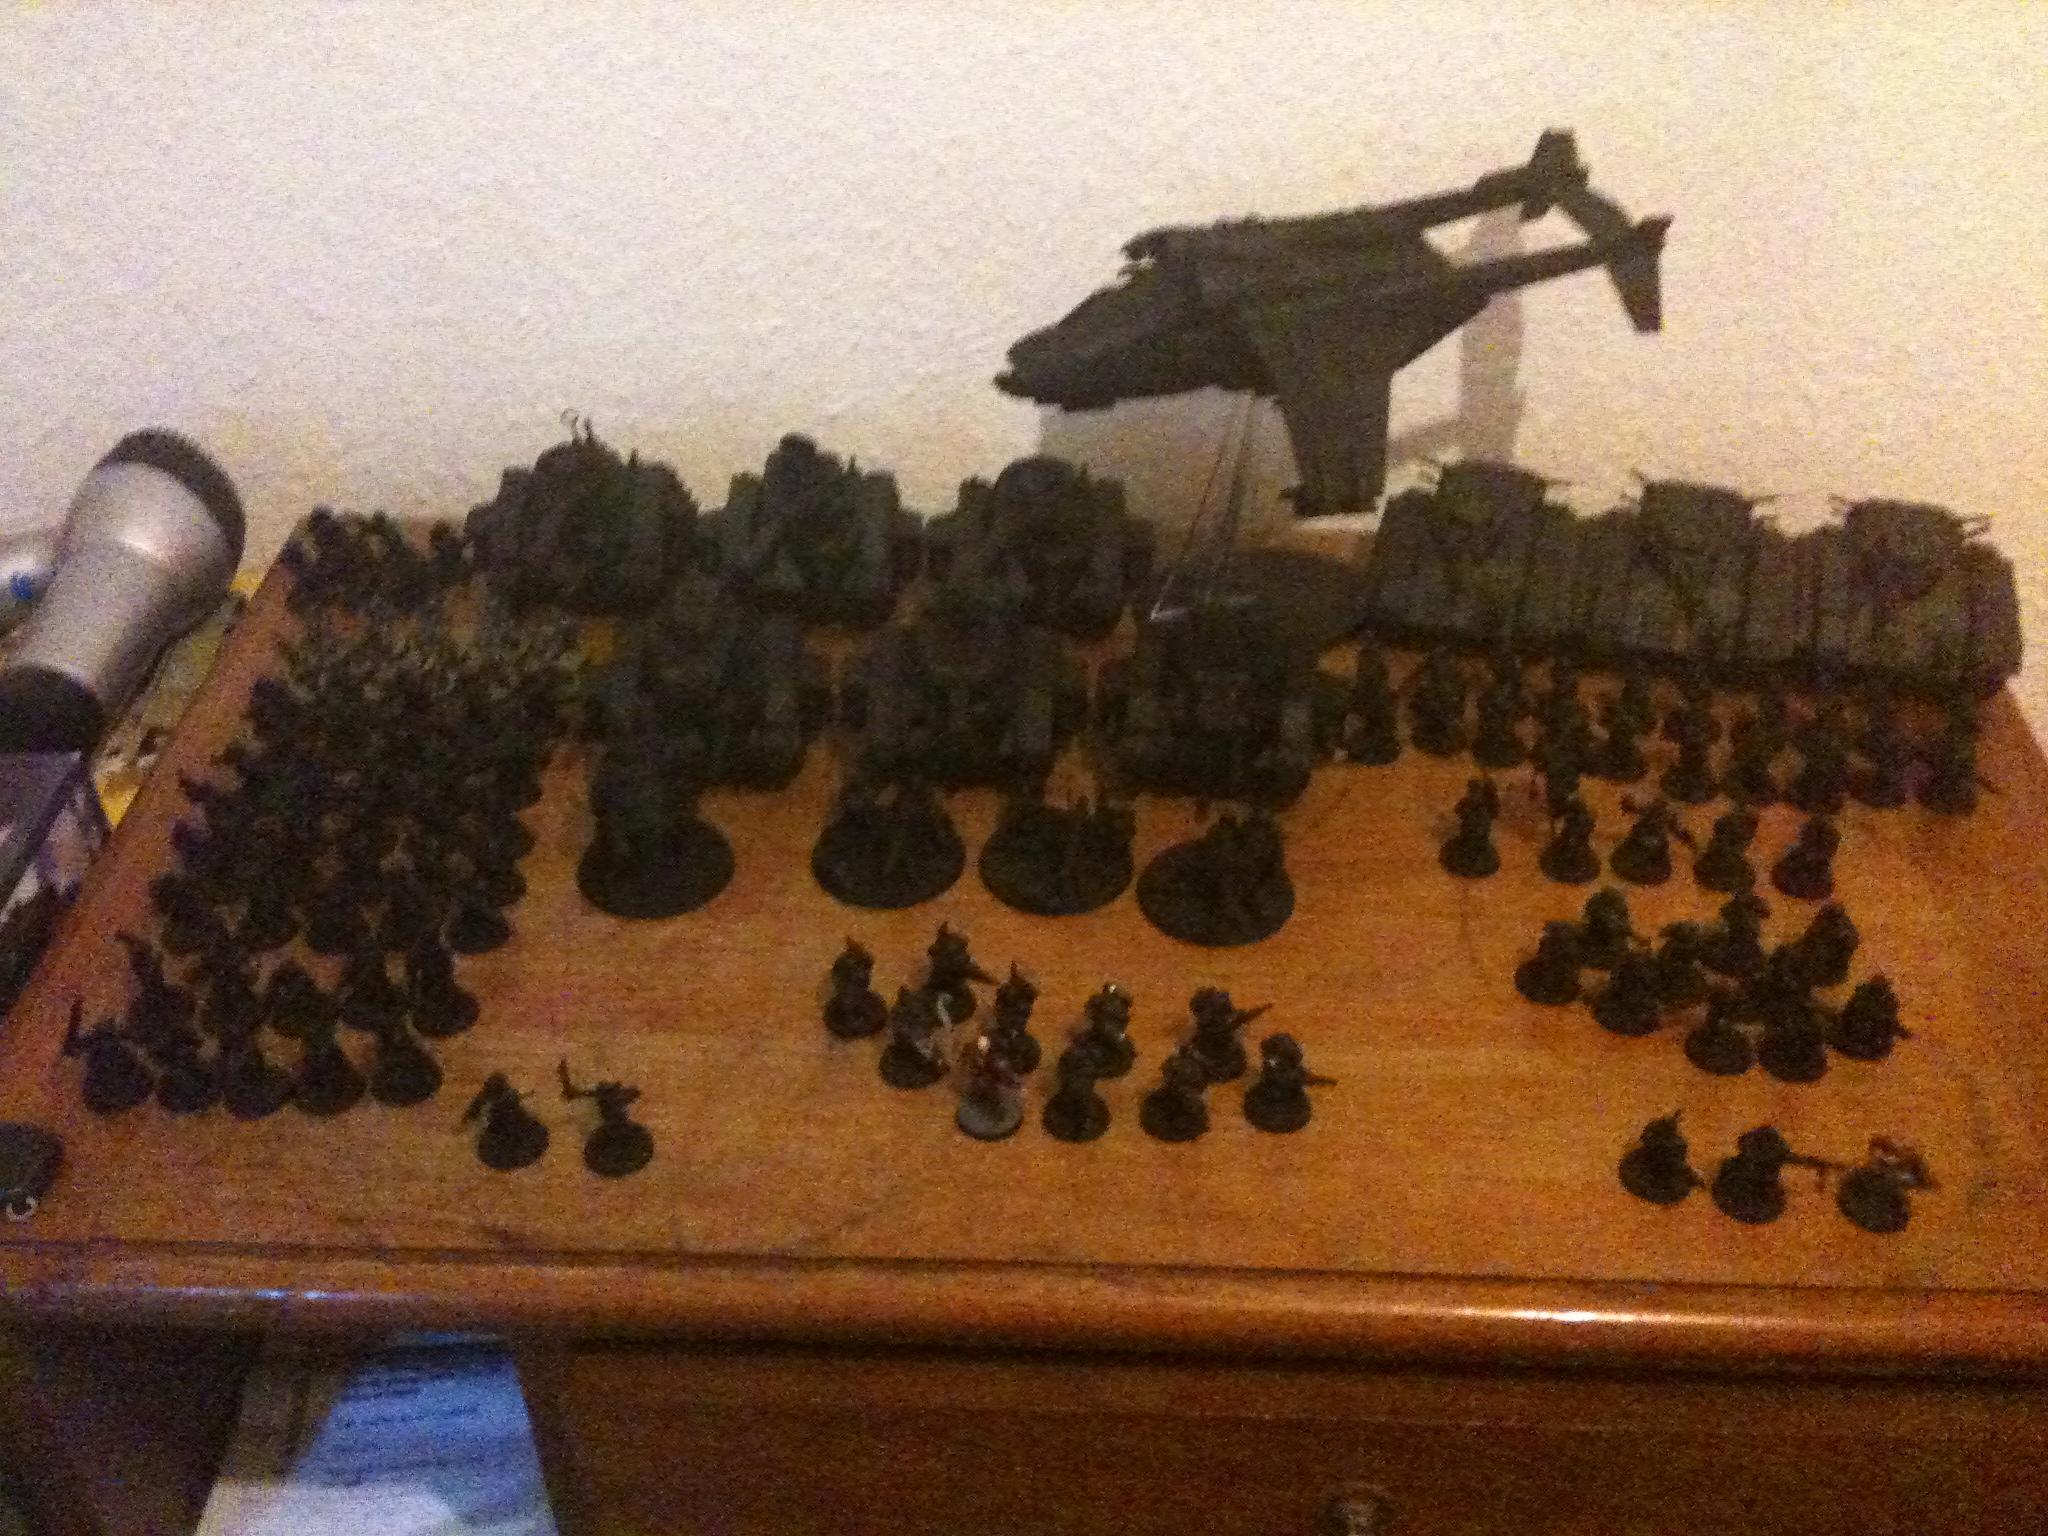 Here is what I started out with undercoated